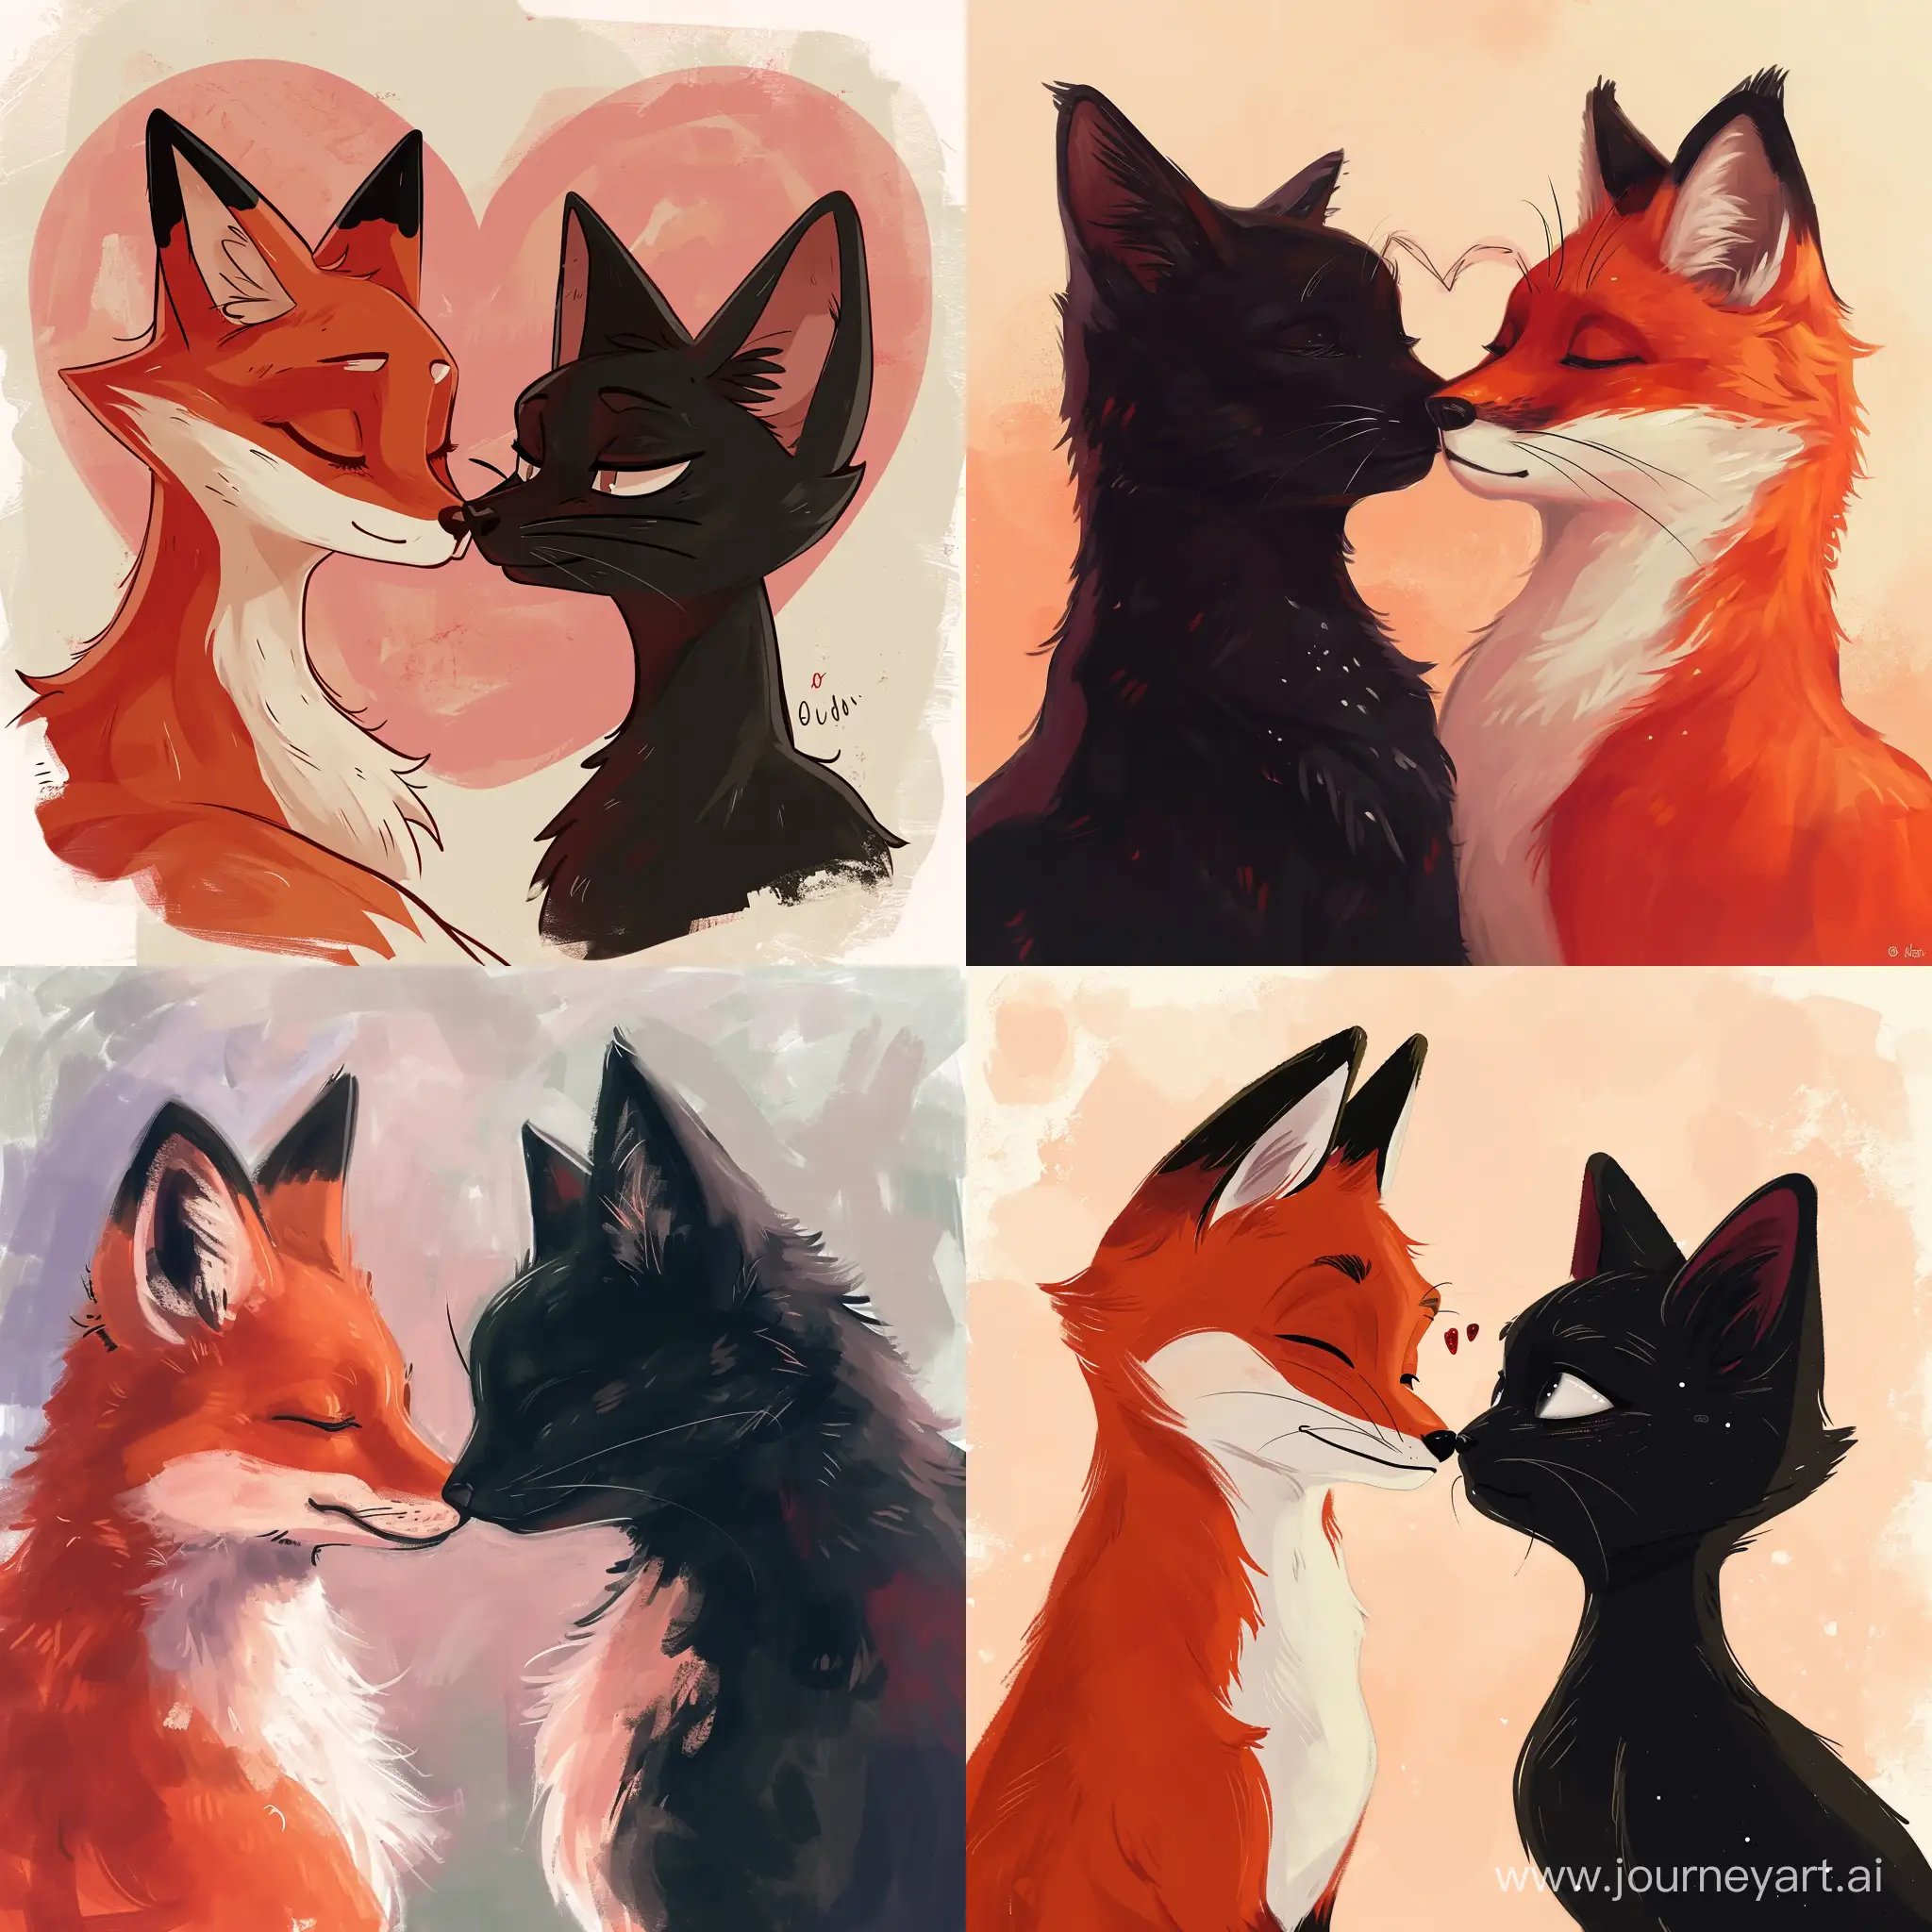 Anime-Style-Red-Fox-and-Black-Cat-in-Heart-Formation